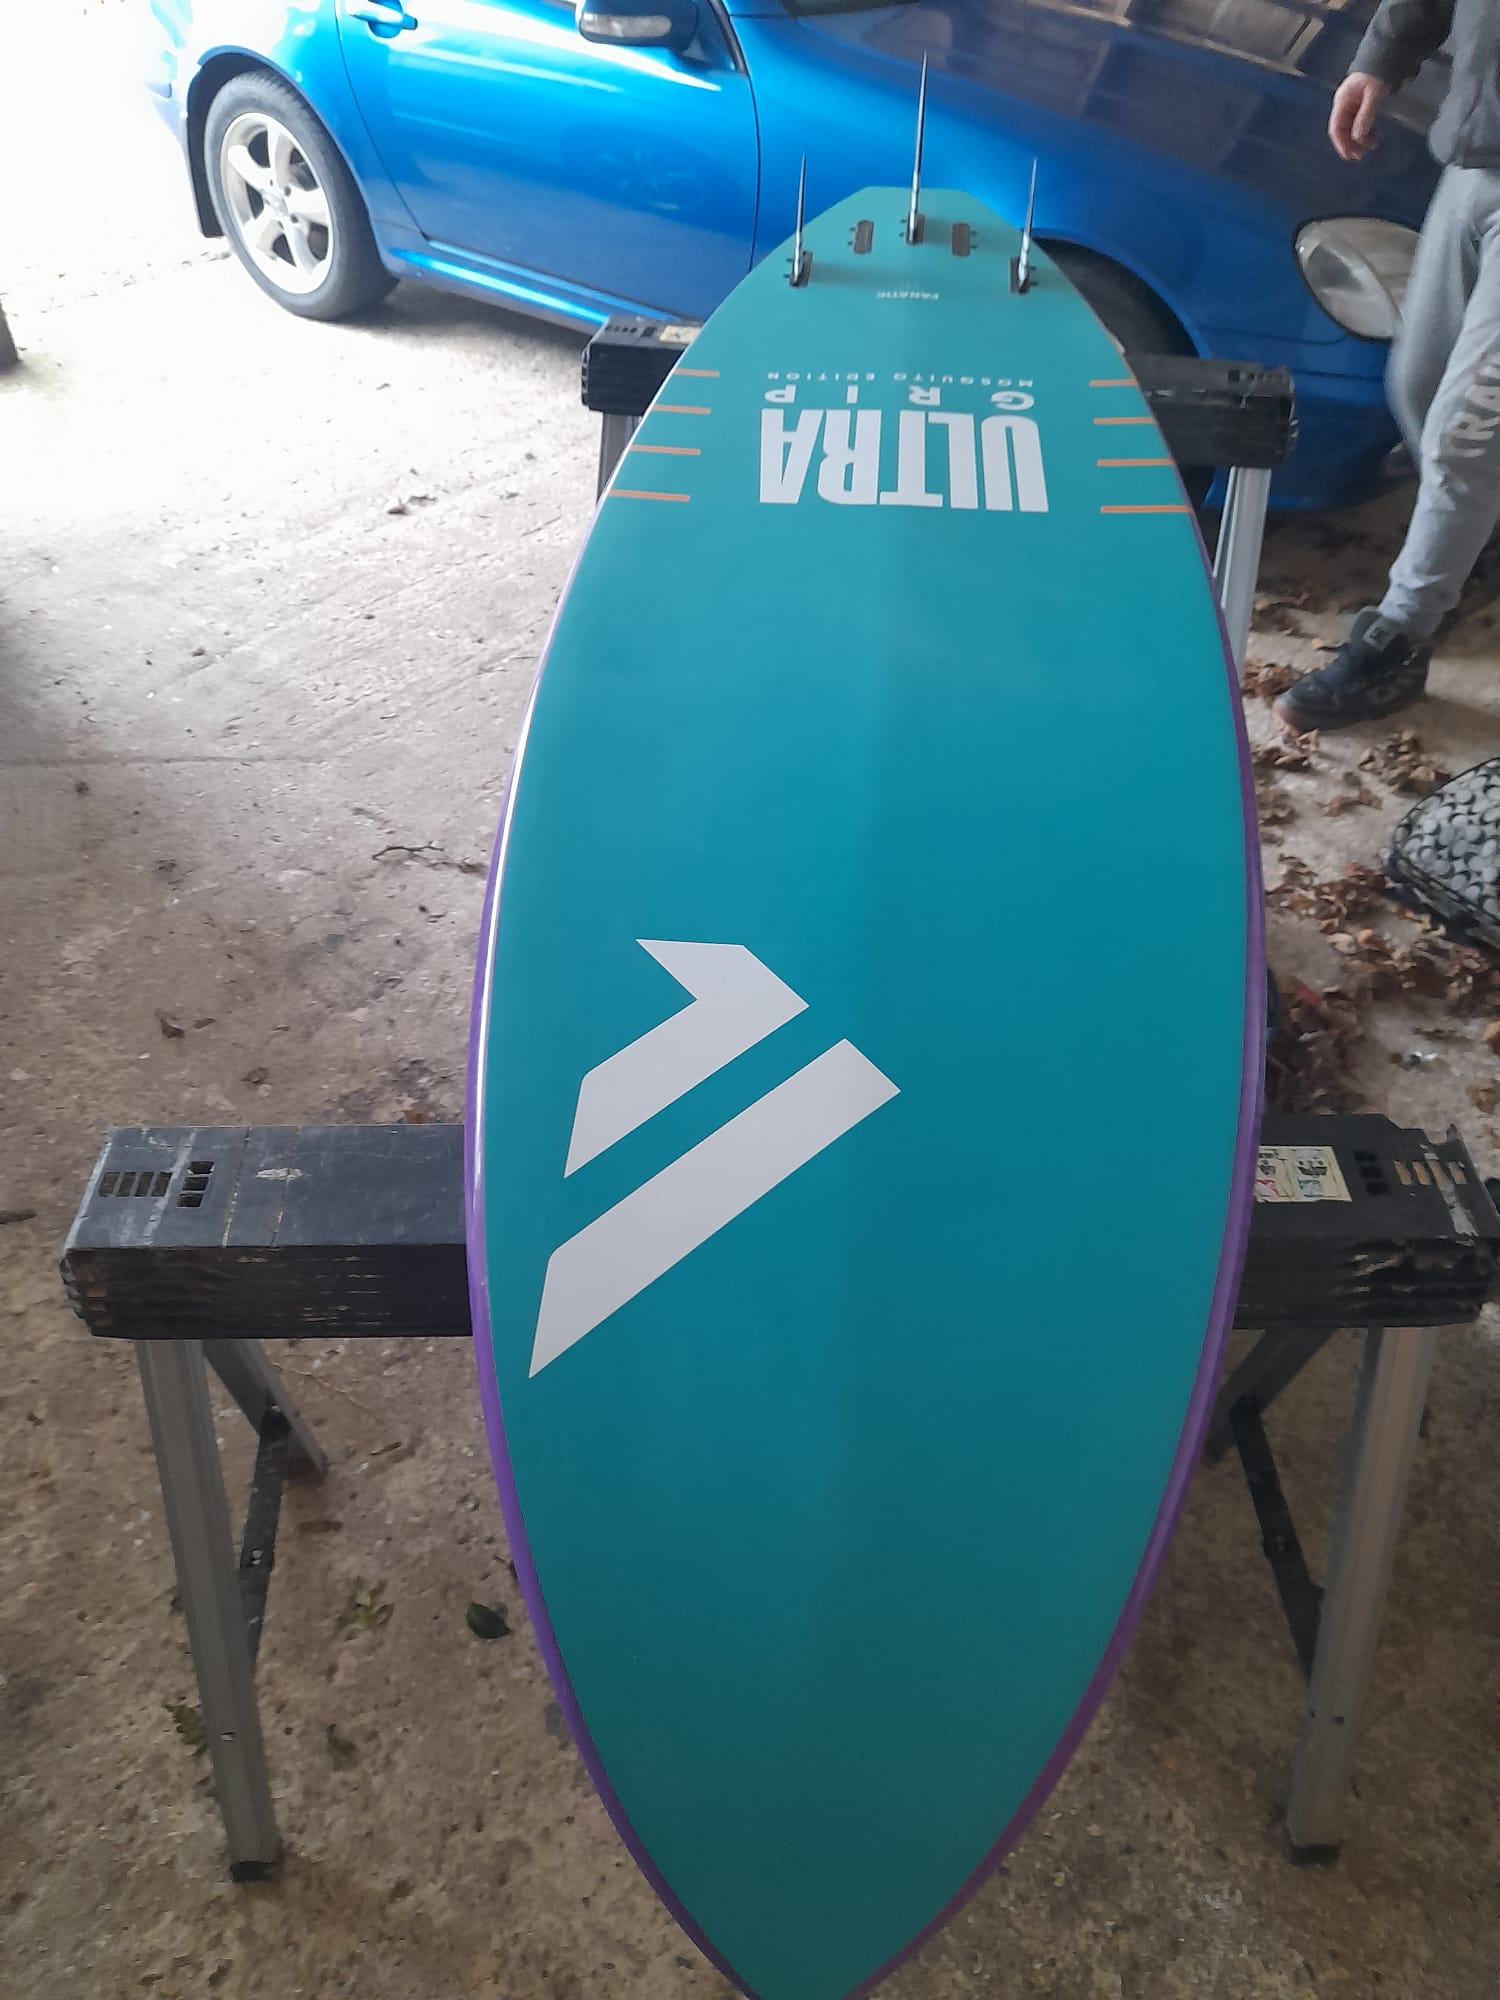 Used Fanatic Grip Ultra mosquito edition 92l - Worthing Watersports - Windsurfing Boards - Fanatic Windsurfing